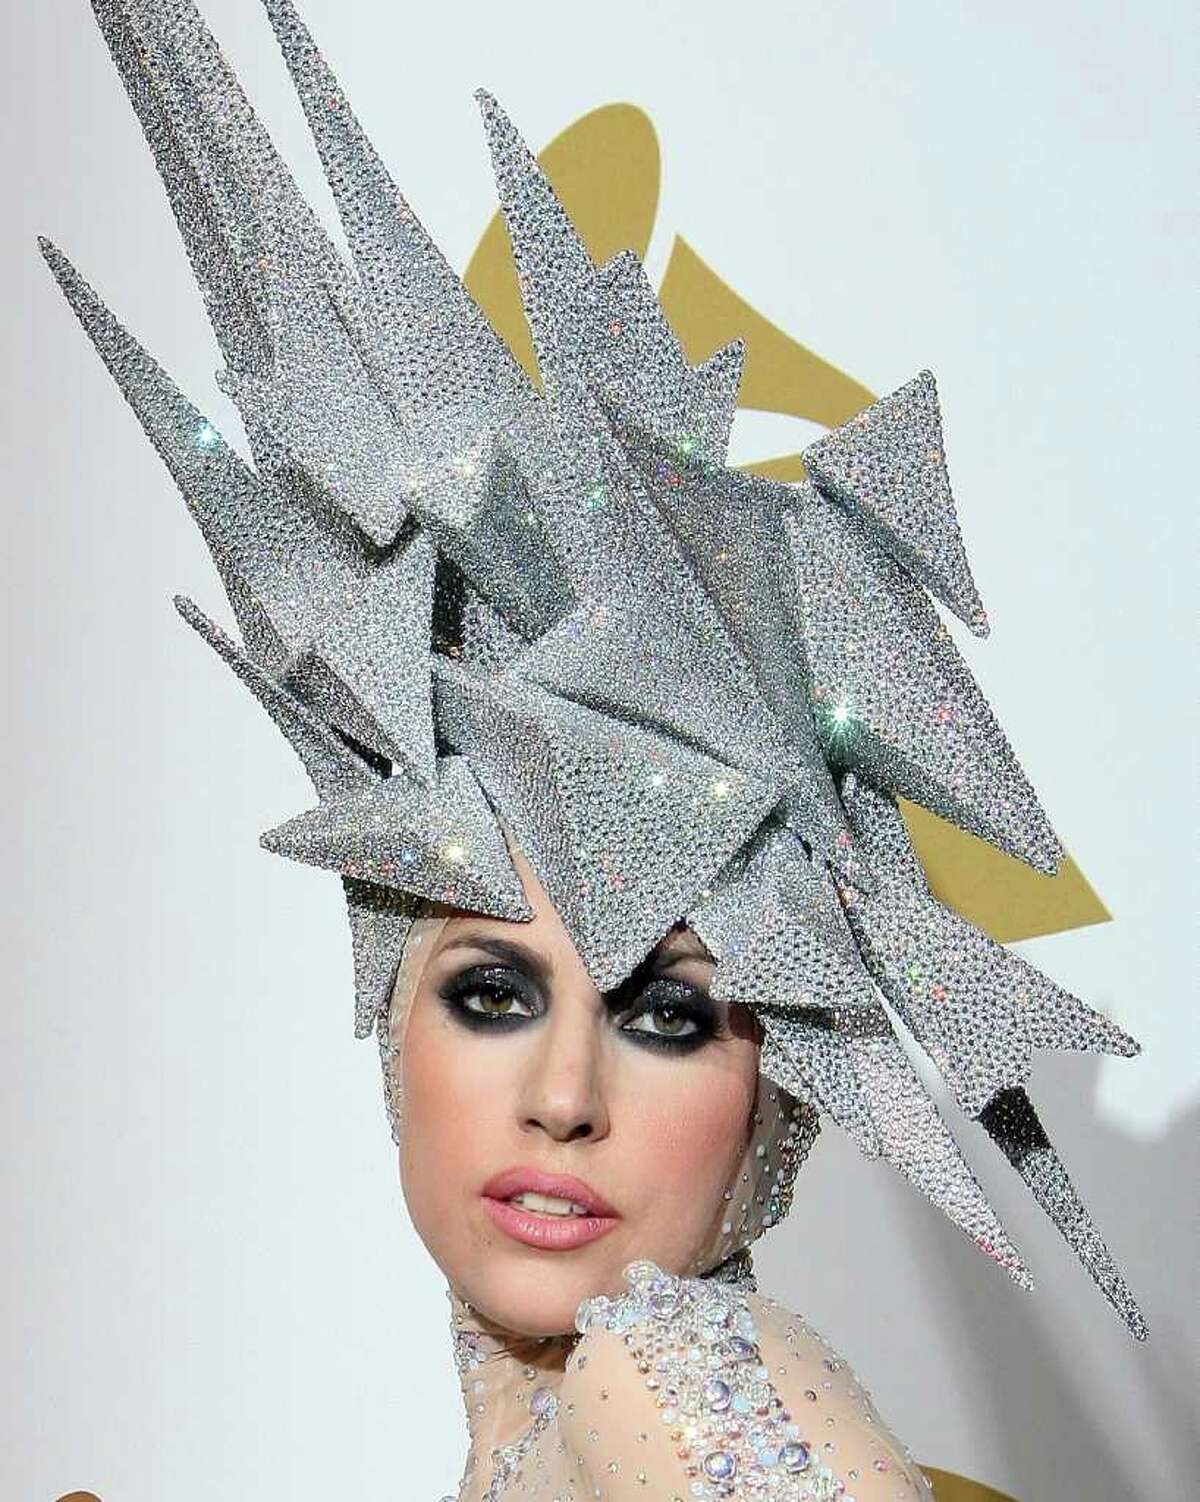 Lady Gaga poses with her awards during the 52nd annual Grammy Awards in Los Angeles, California on January 31, 2010.